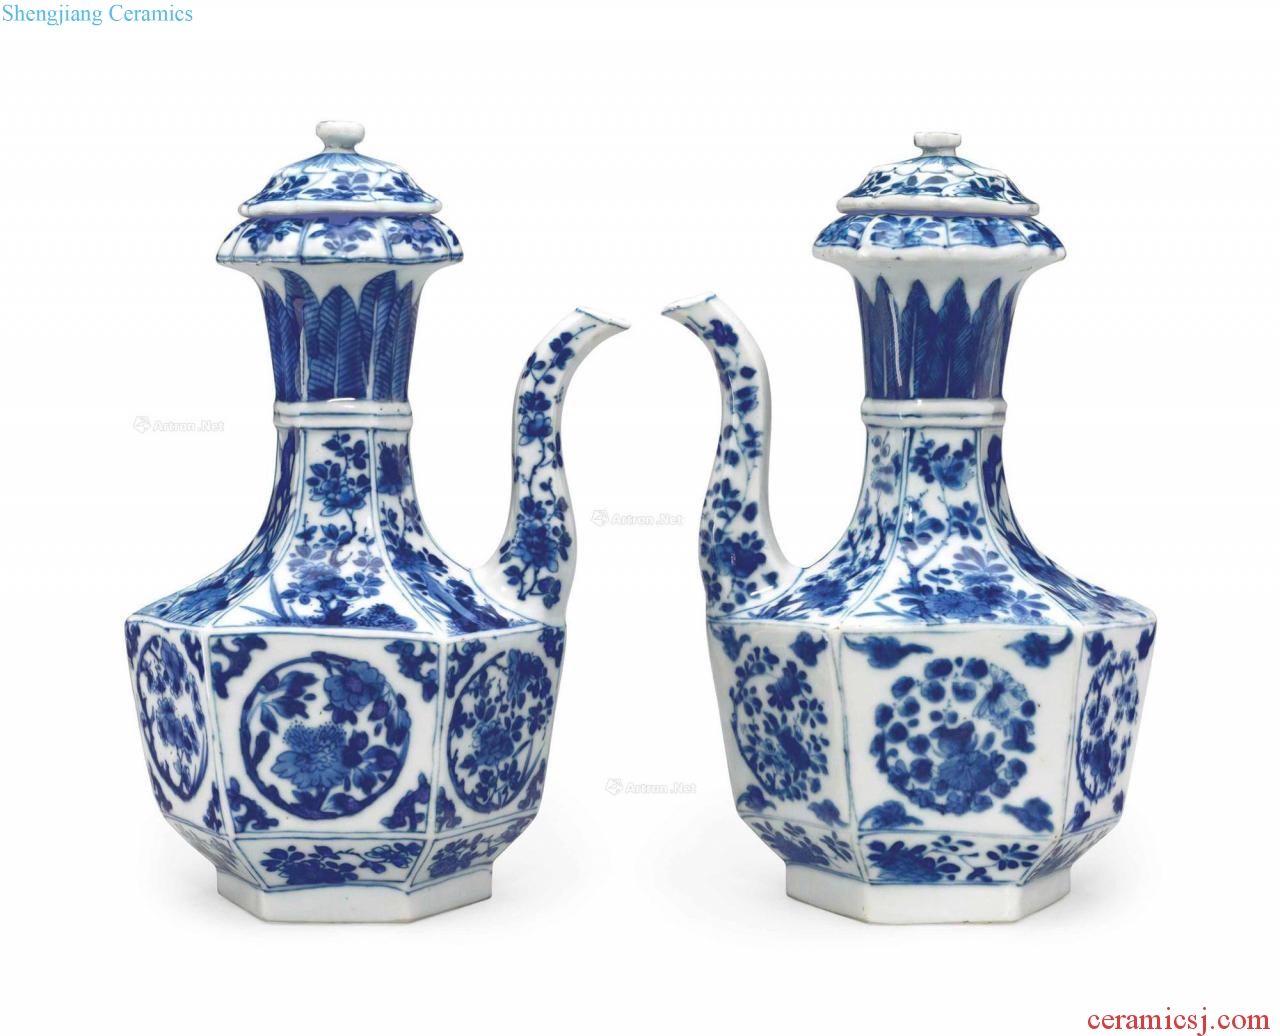 Kangxi period, 1662-1722 - A PAIR OF BLUE AND WHITE EWERS AND COVERS